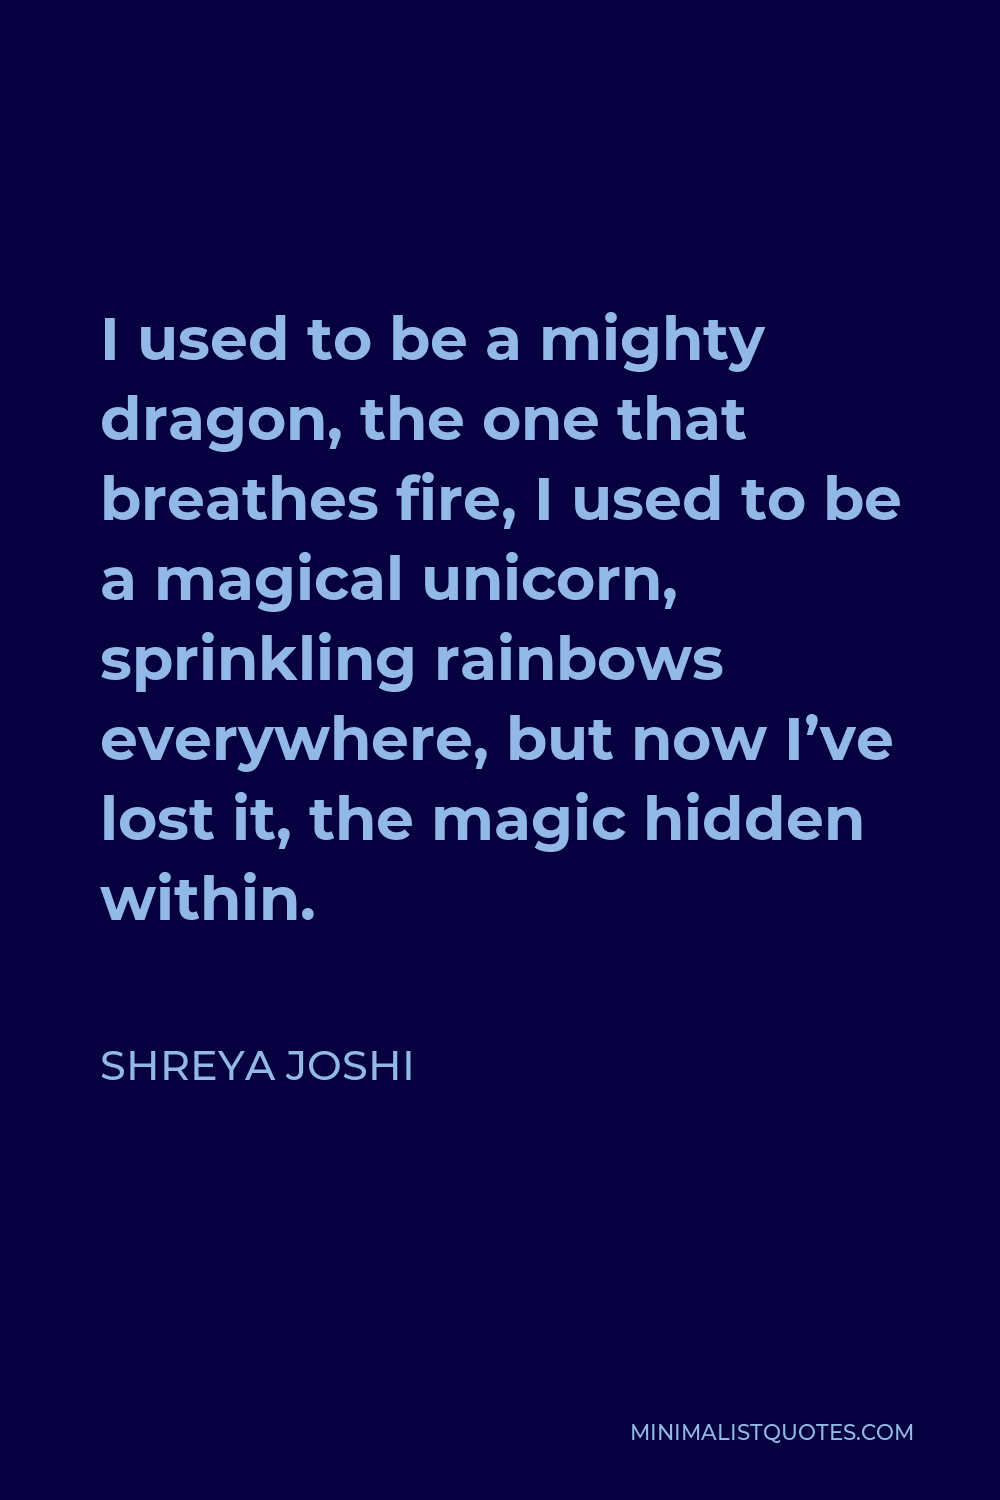 Shreya Joshi Quote - I used to be a mighty dragon, the one that breathes fire, I used to be a magical unicorn, sprinkling rainbows everywhere, but now I’ve lost it, the magic hidden within.